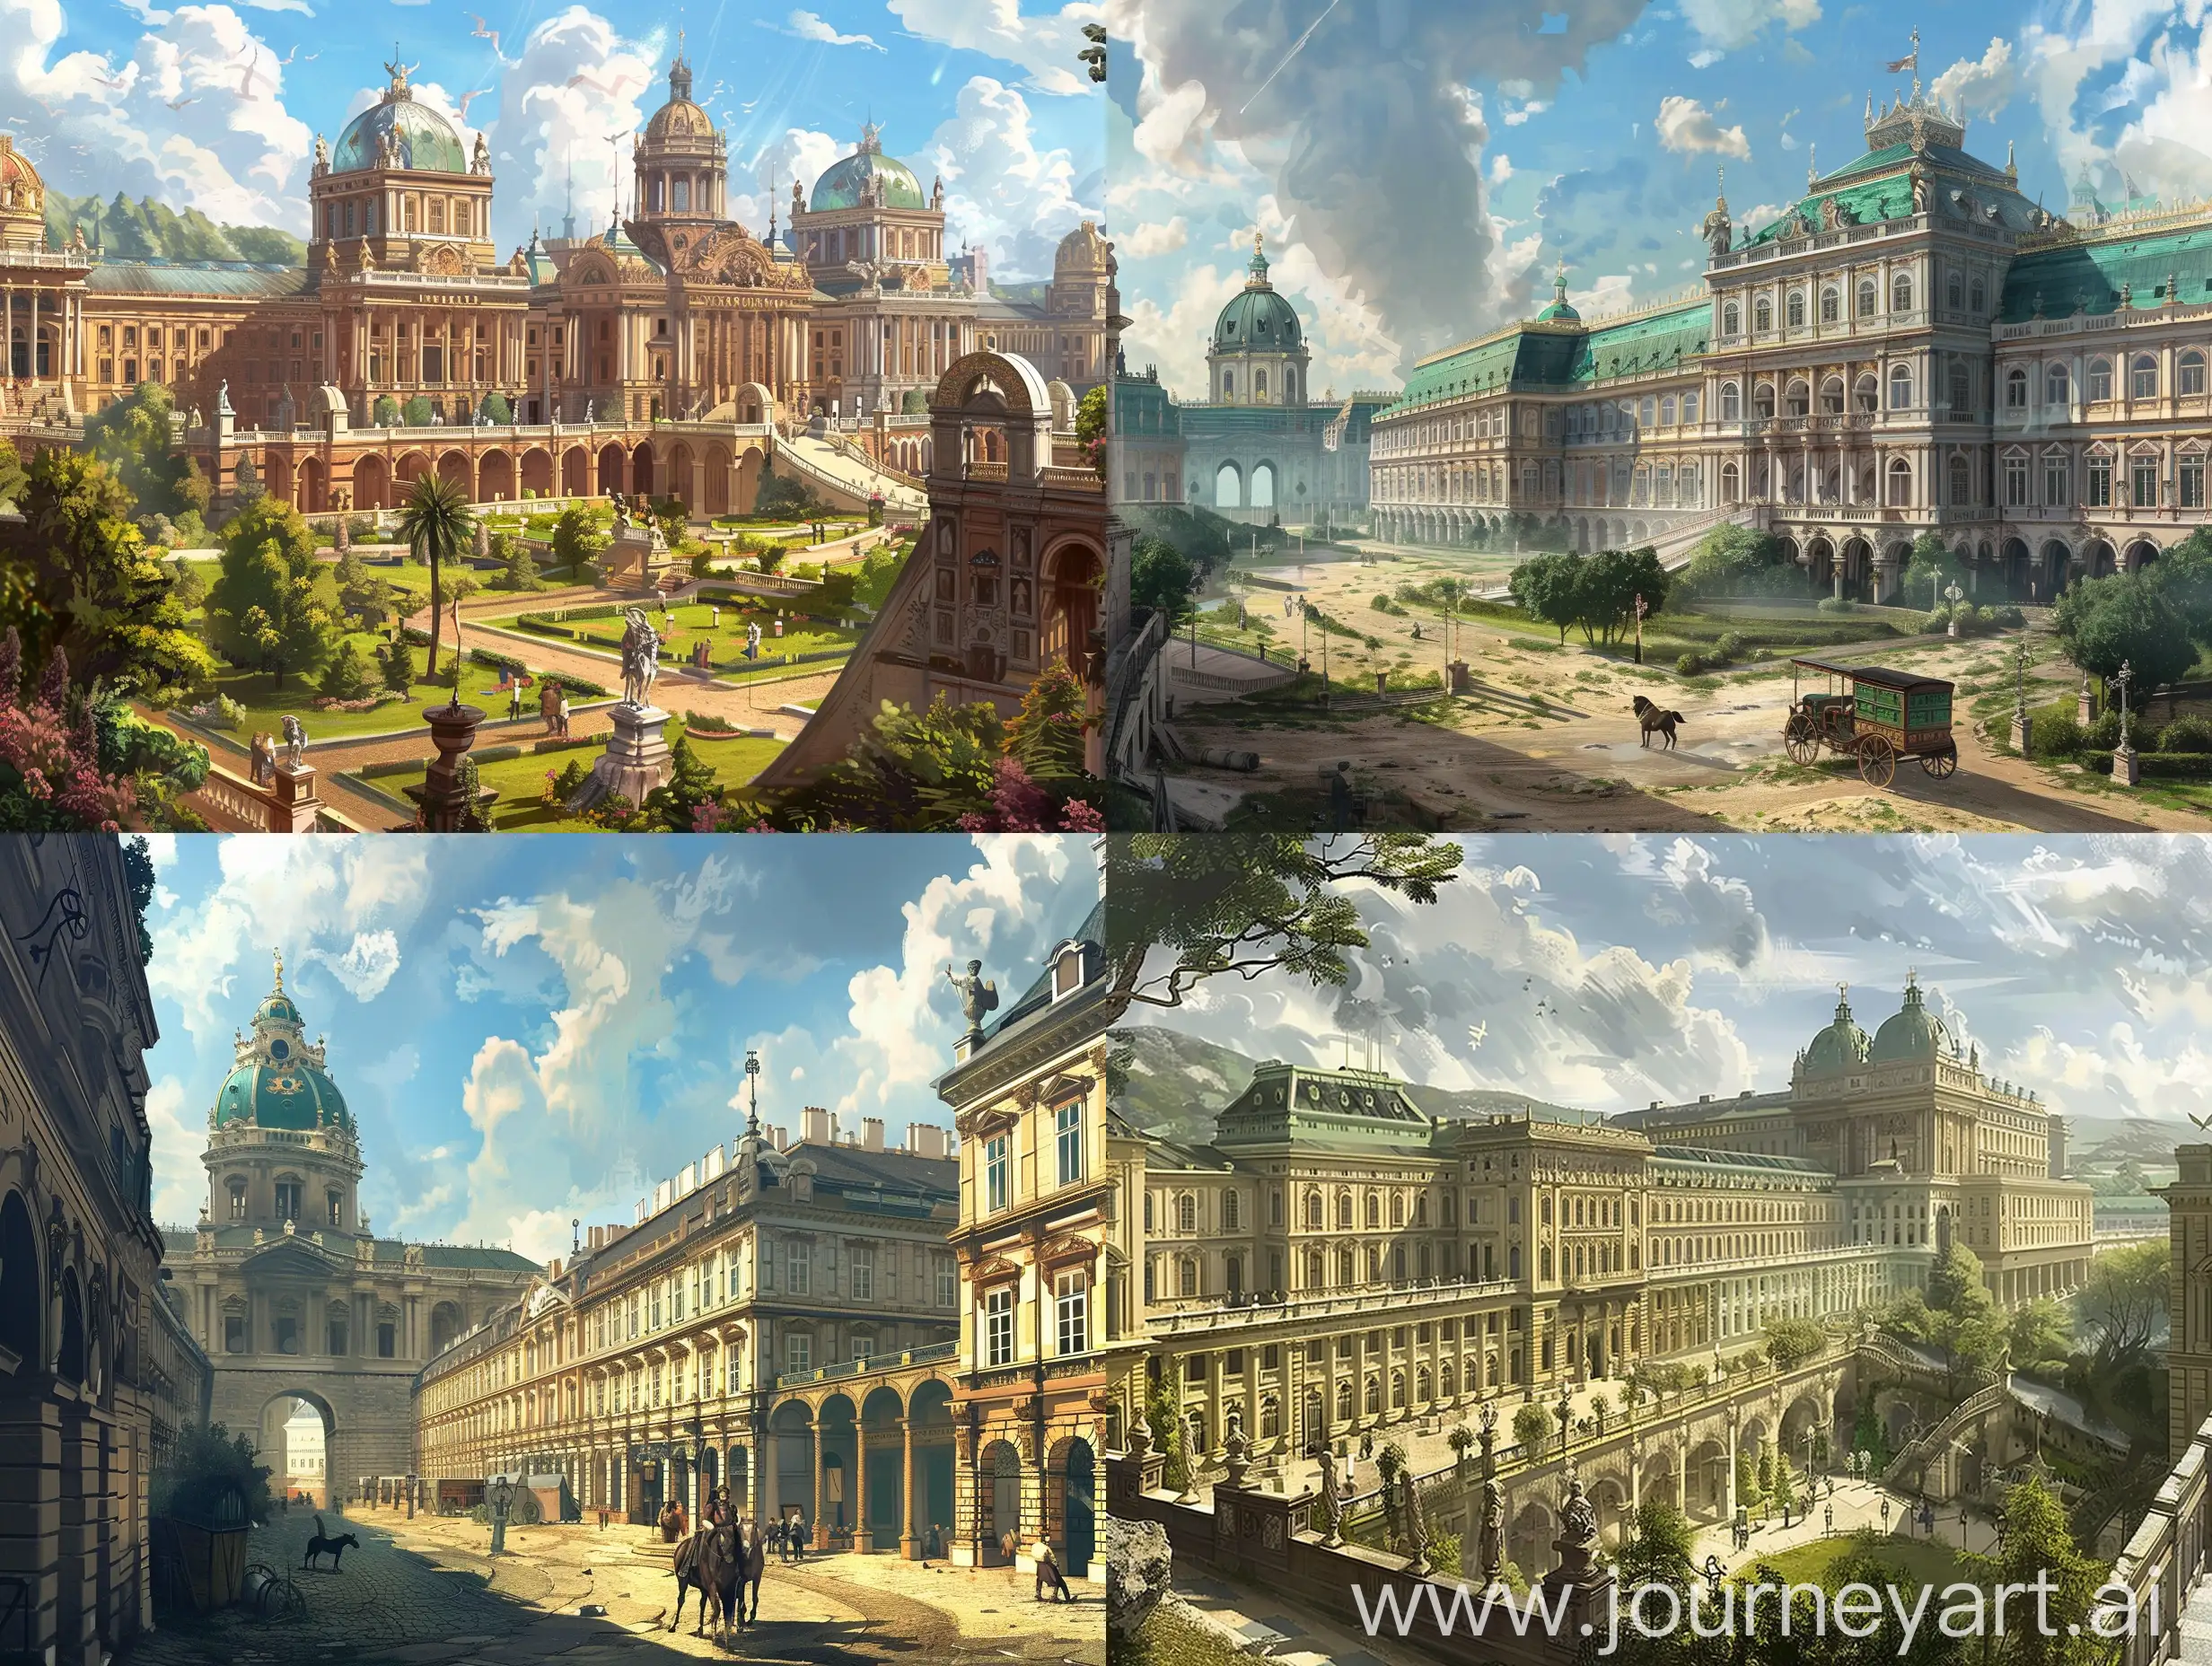 Magical-Fantasy-Version-of-Viennese-Hofburg-in-the-1810s